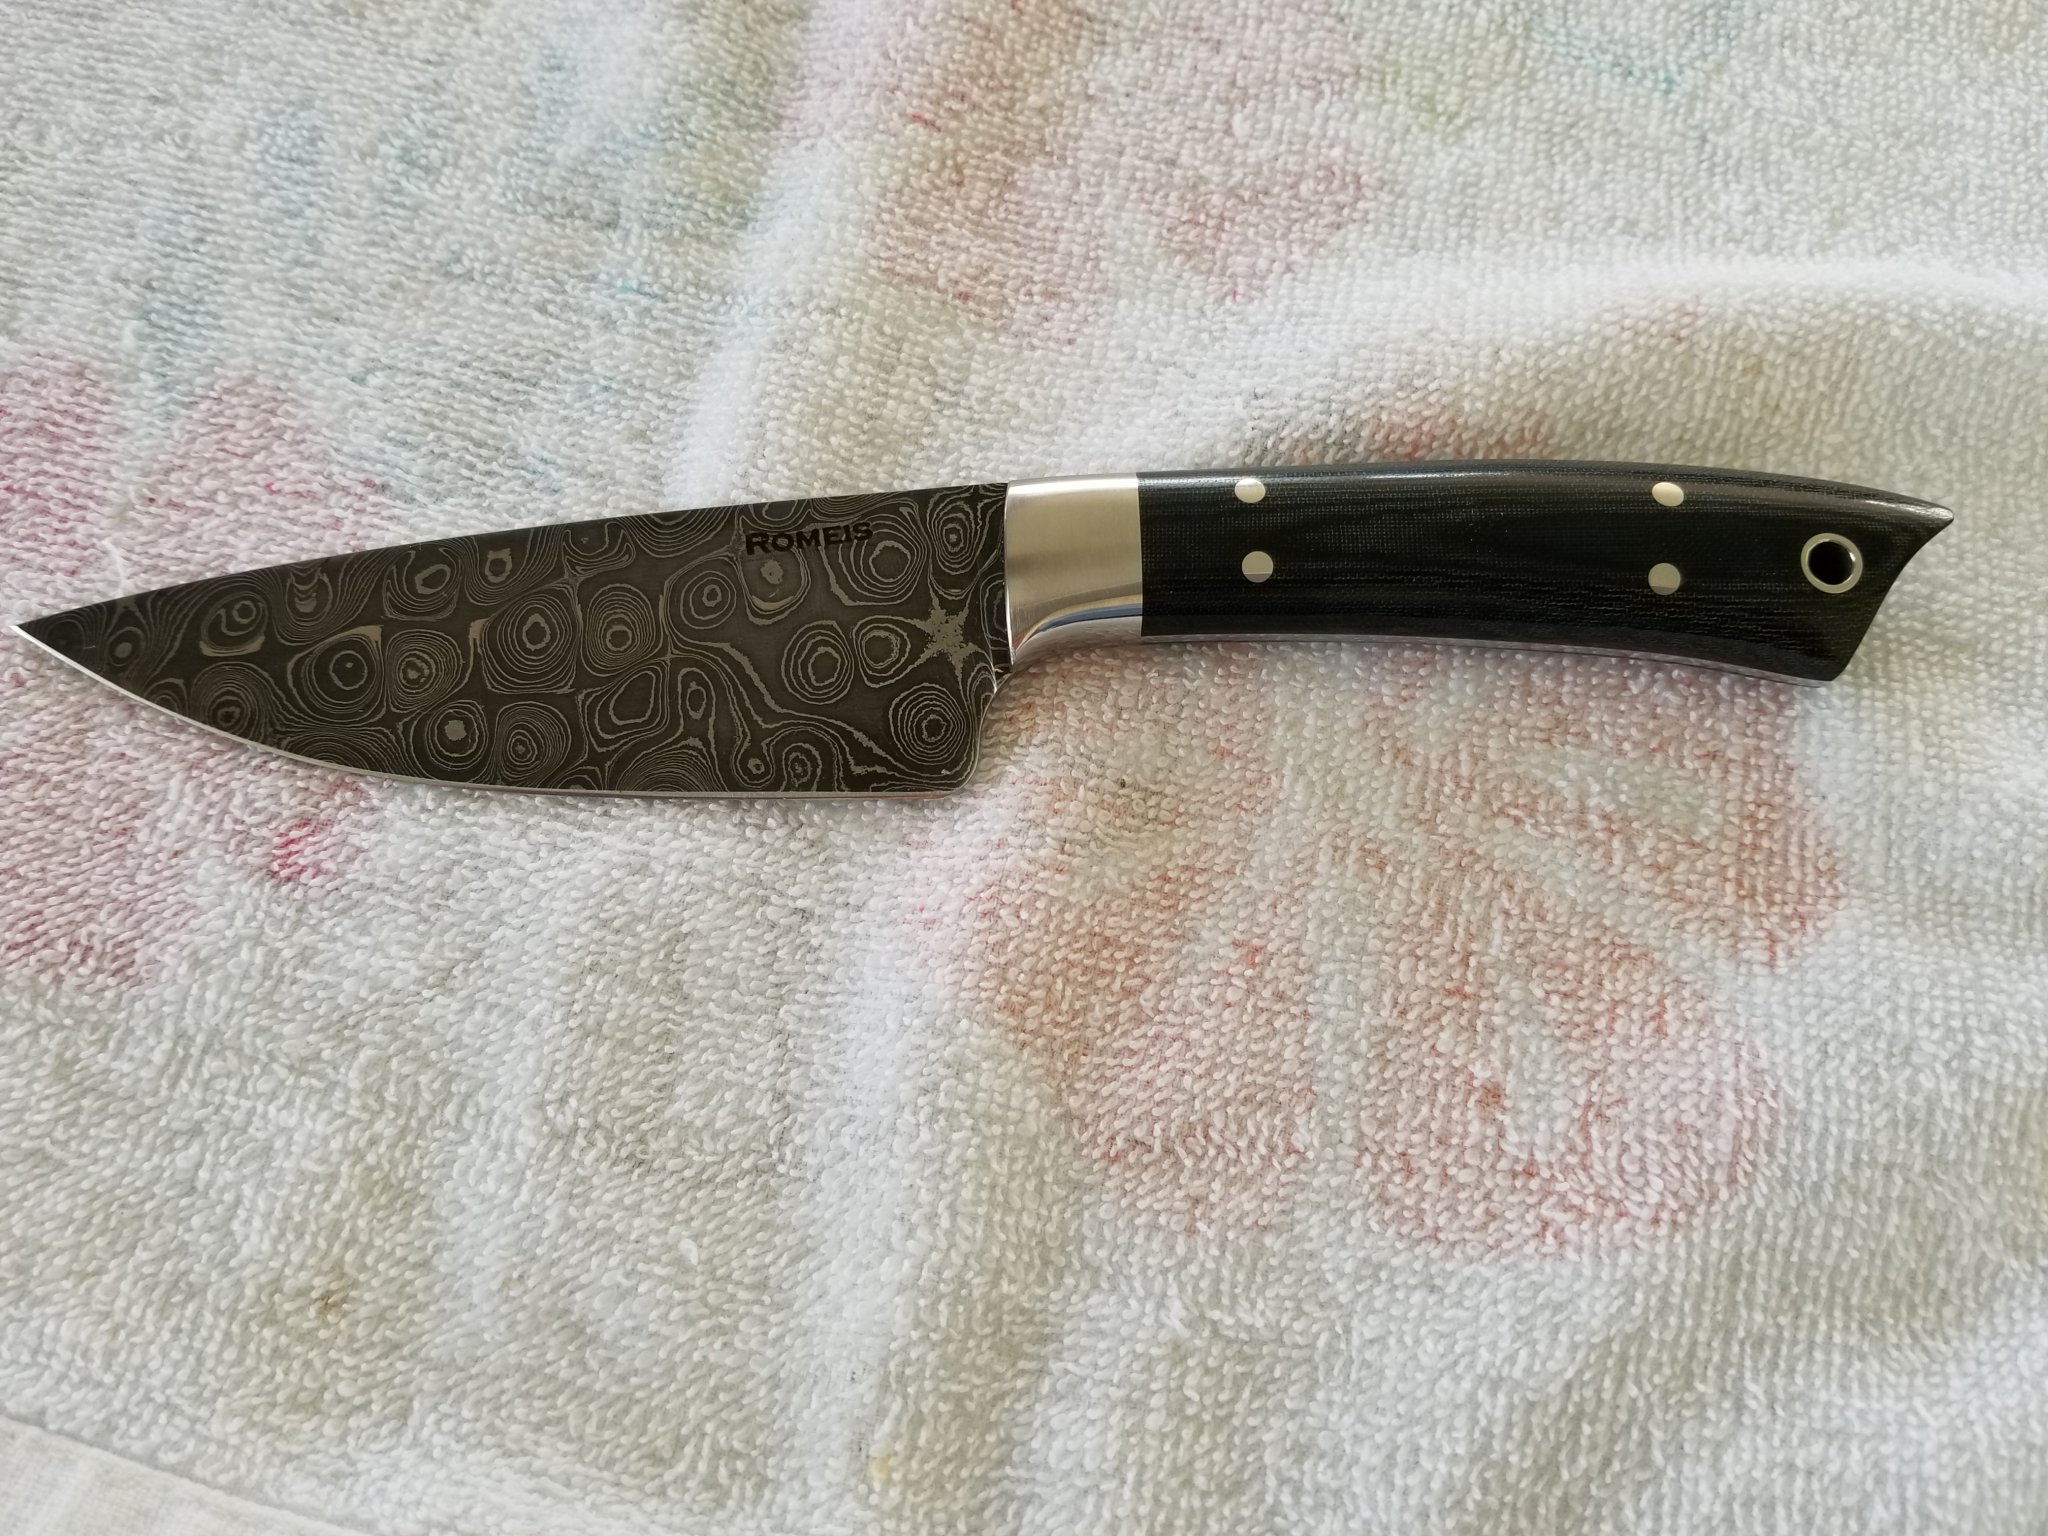 Are KAMIKOTO knives a SCAM? 